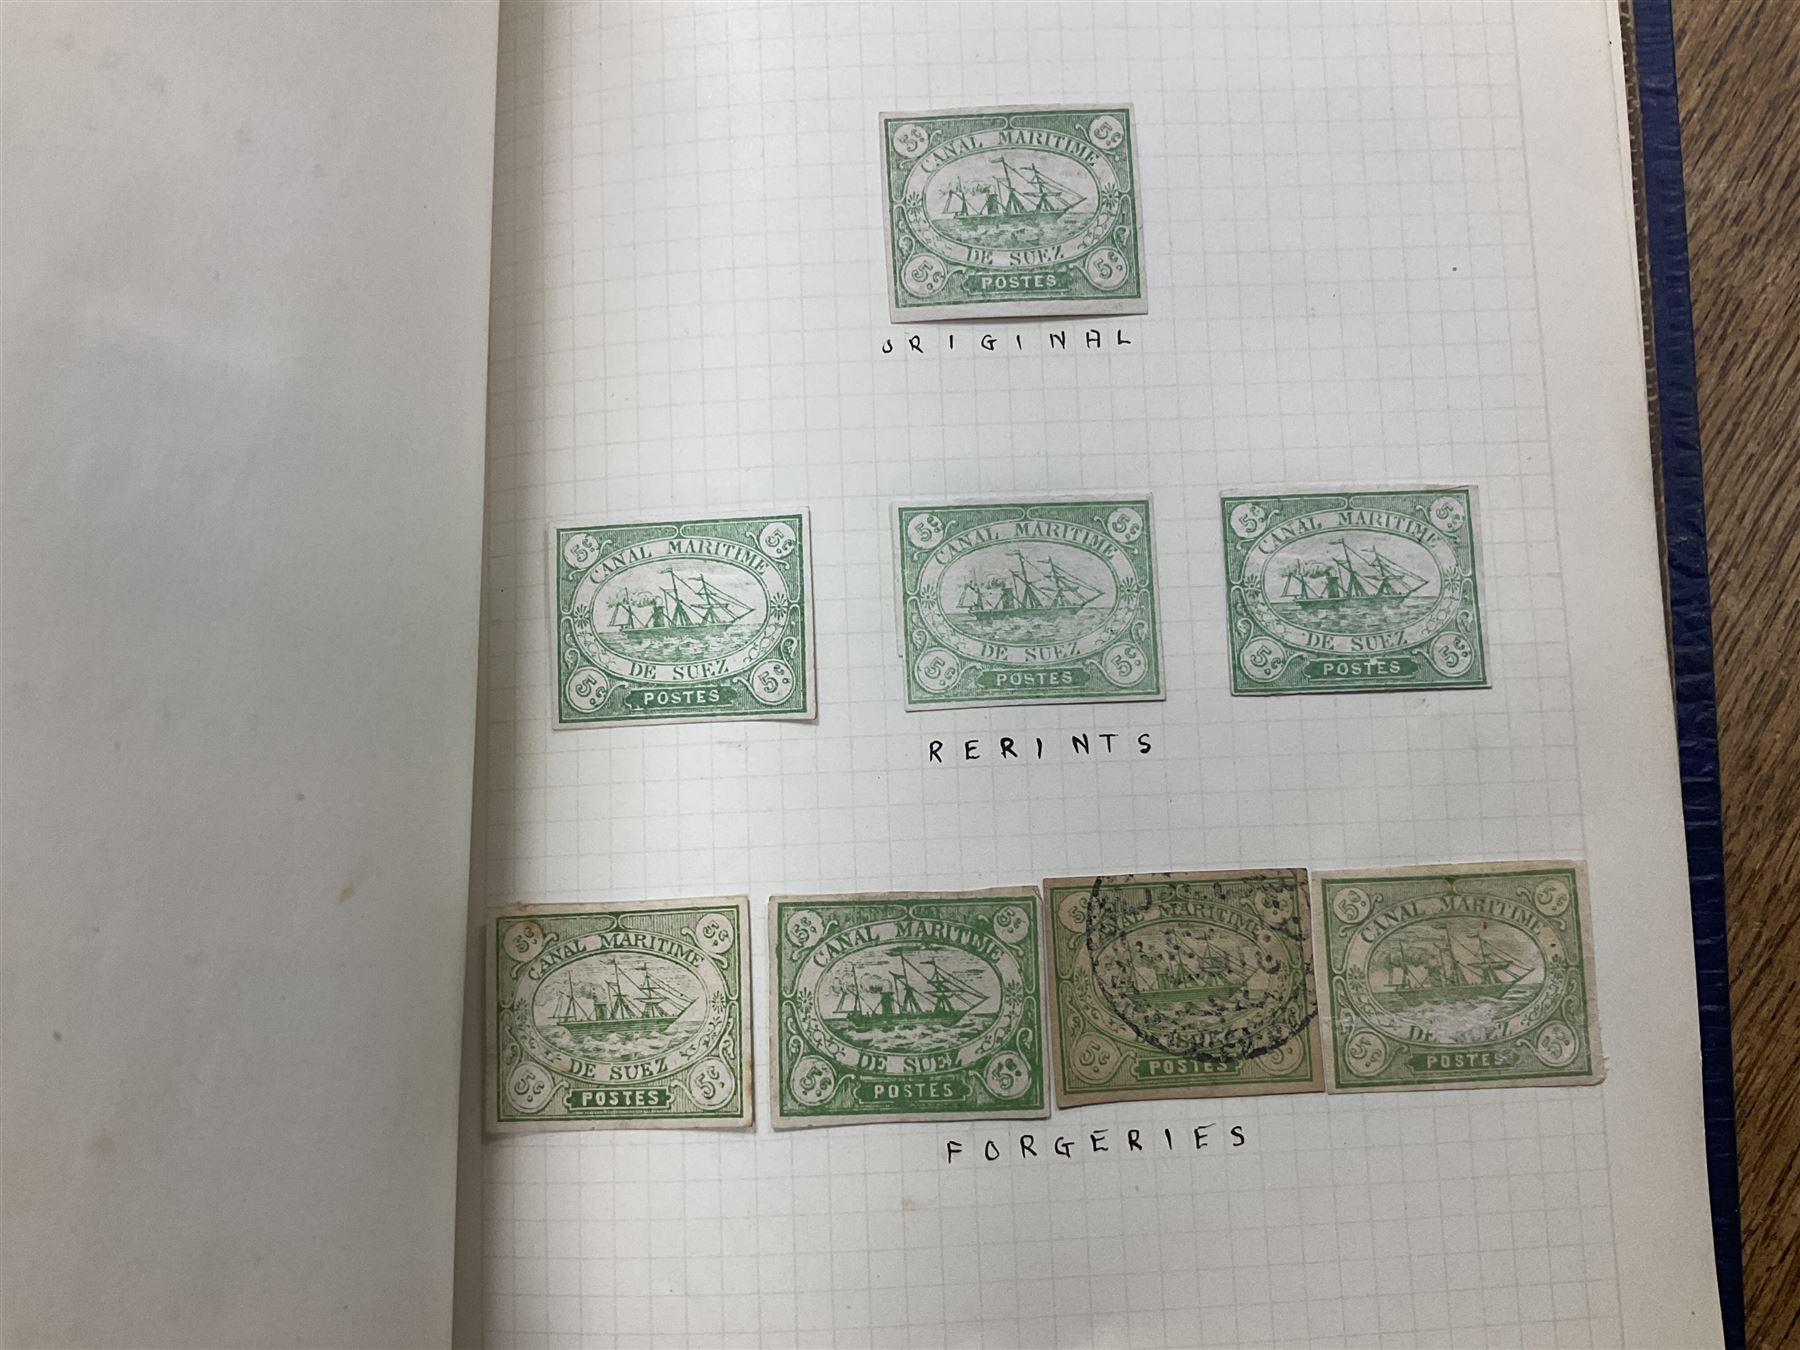 Egypt 1866 and later stamps - Image 616 of 761